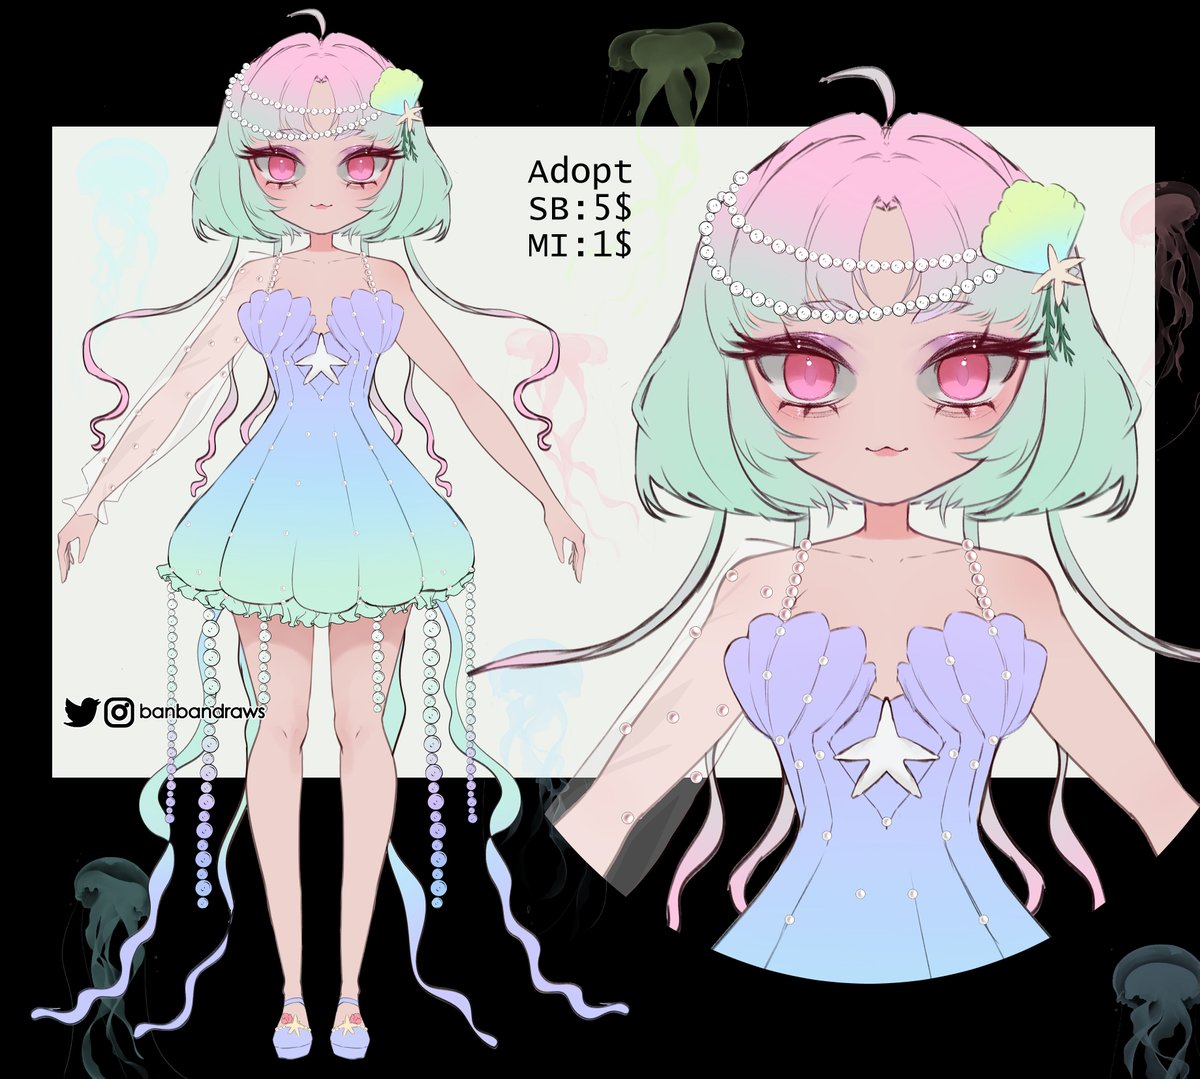 Jellyfish themed Adopt
Sb: 5$
MI: 1$
Ab 01: 25$ with commercial use
Ab 02: 35$ + commercial use+ a colored sketch head-shot 
Rts are appreciated 
#adopt #adoptable #adoptableauction #adoptopen